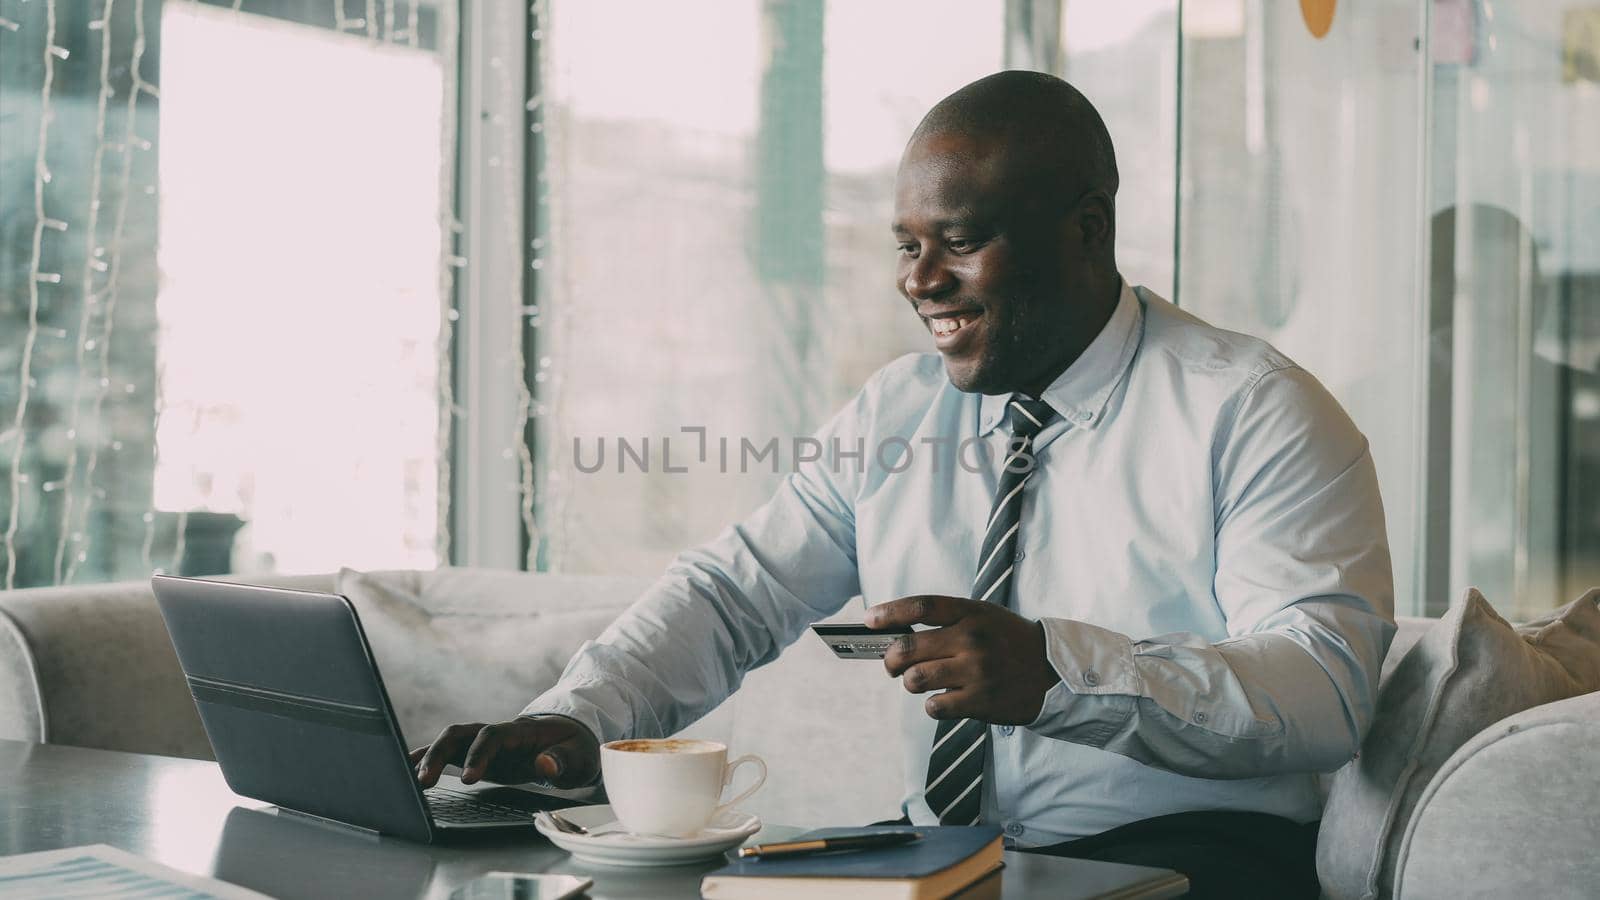 Optimistic African American businessman in formal clothes paying online bill using his credit card and laptop in fashionable cafe during lunch breaak. He smiles happily and raises his clenched fist.